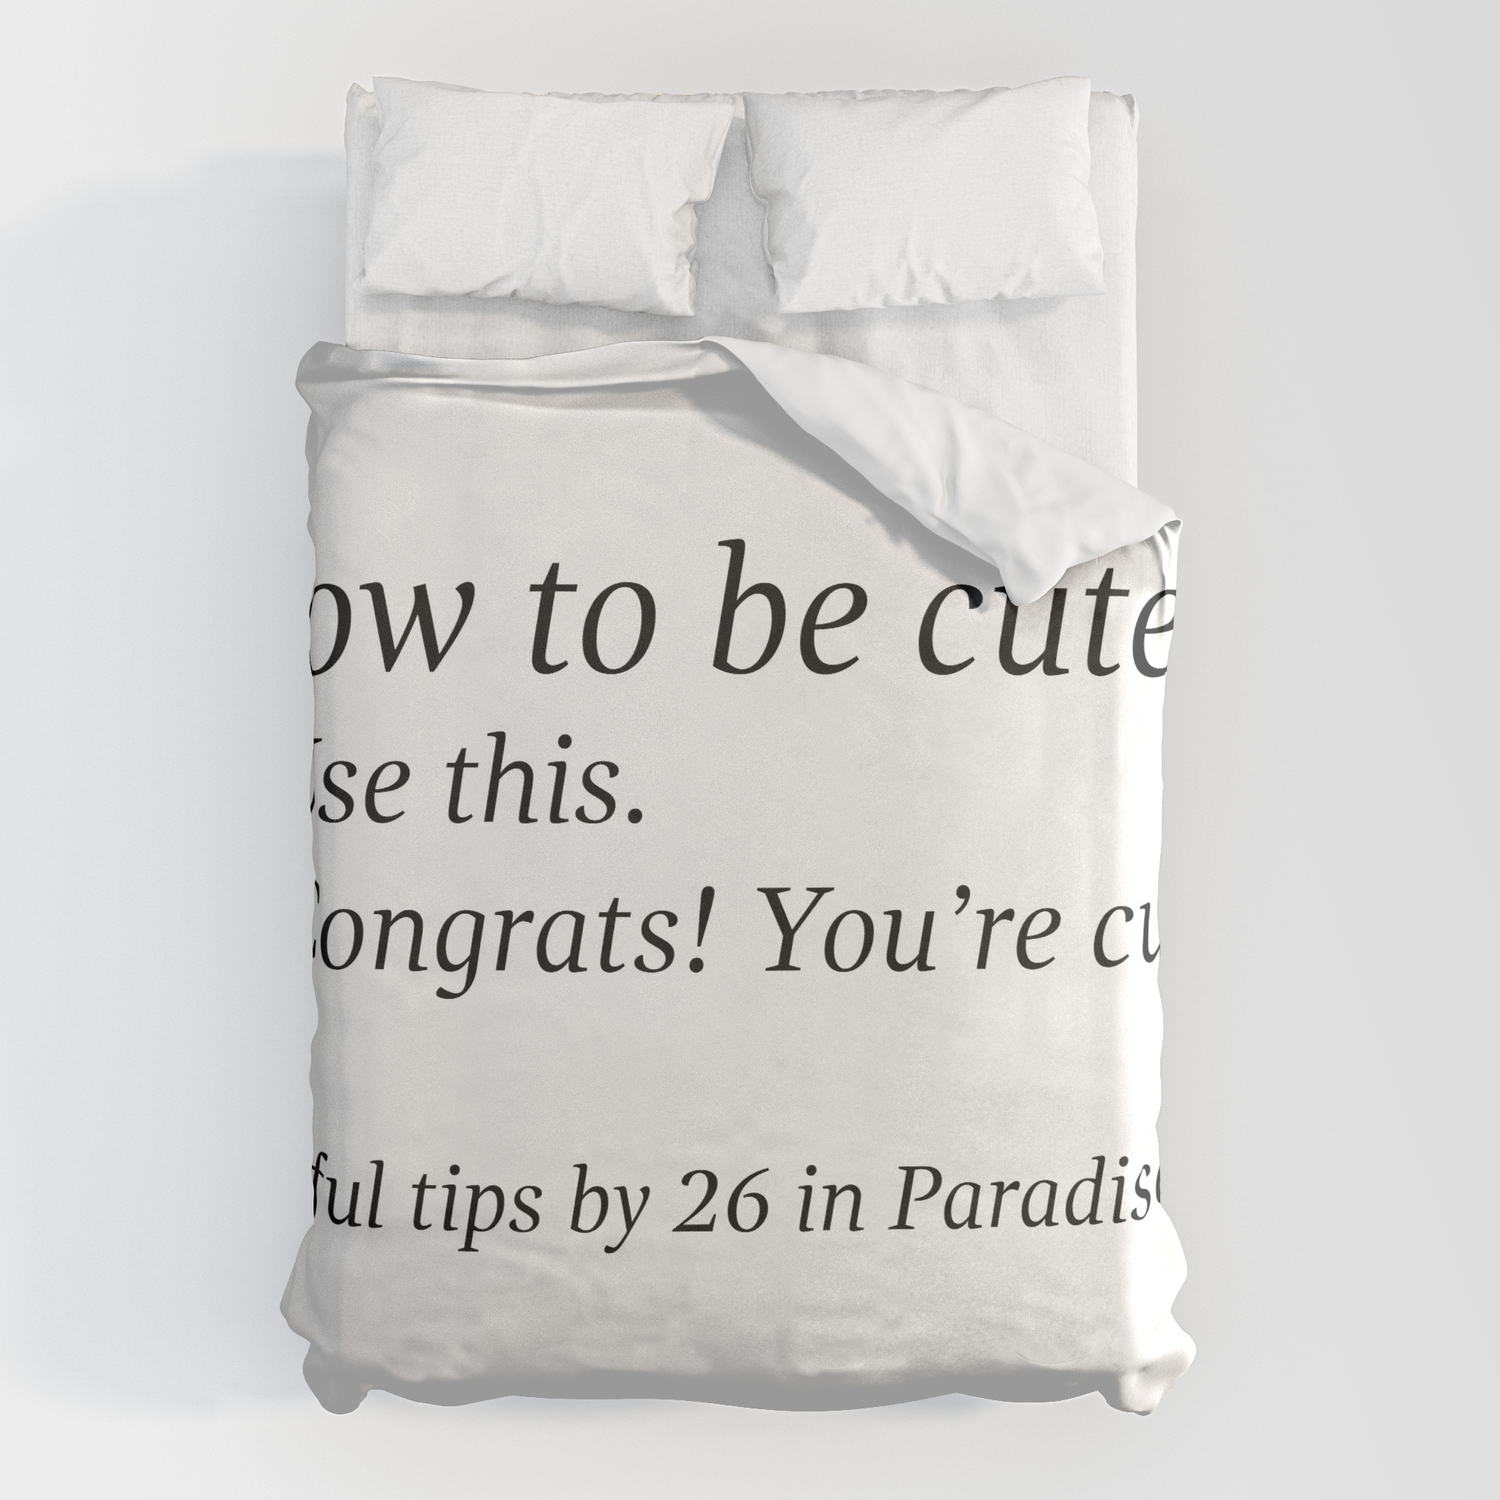 Duvet Cover By 26 In Paradise Society6, Society6 Duvet Cover Review